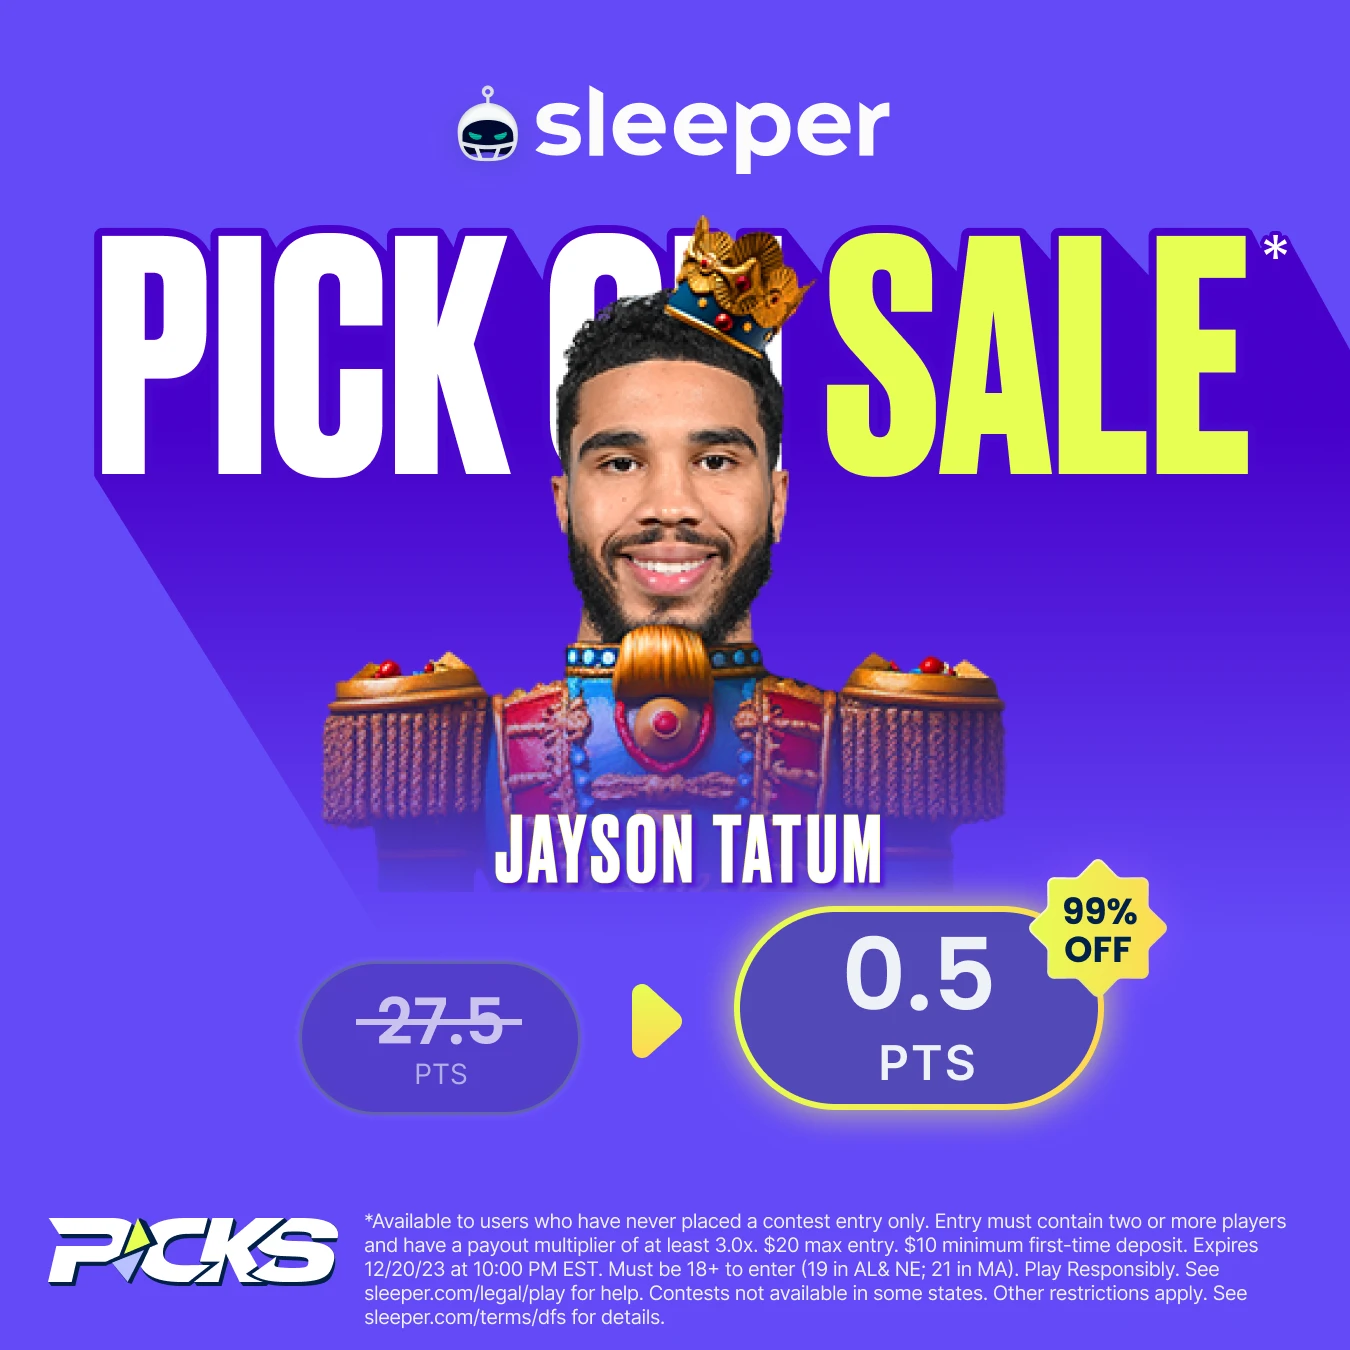 NBA player prop special for Wednesday, Dec. 20 is Jayson Tatum over 0.5 points at Sleeper Fantasy. 